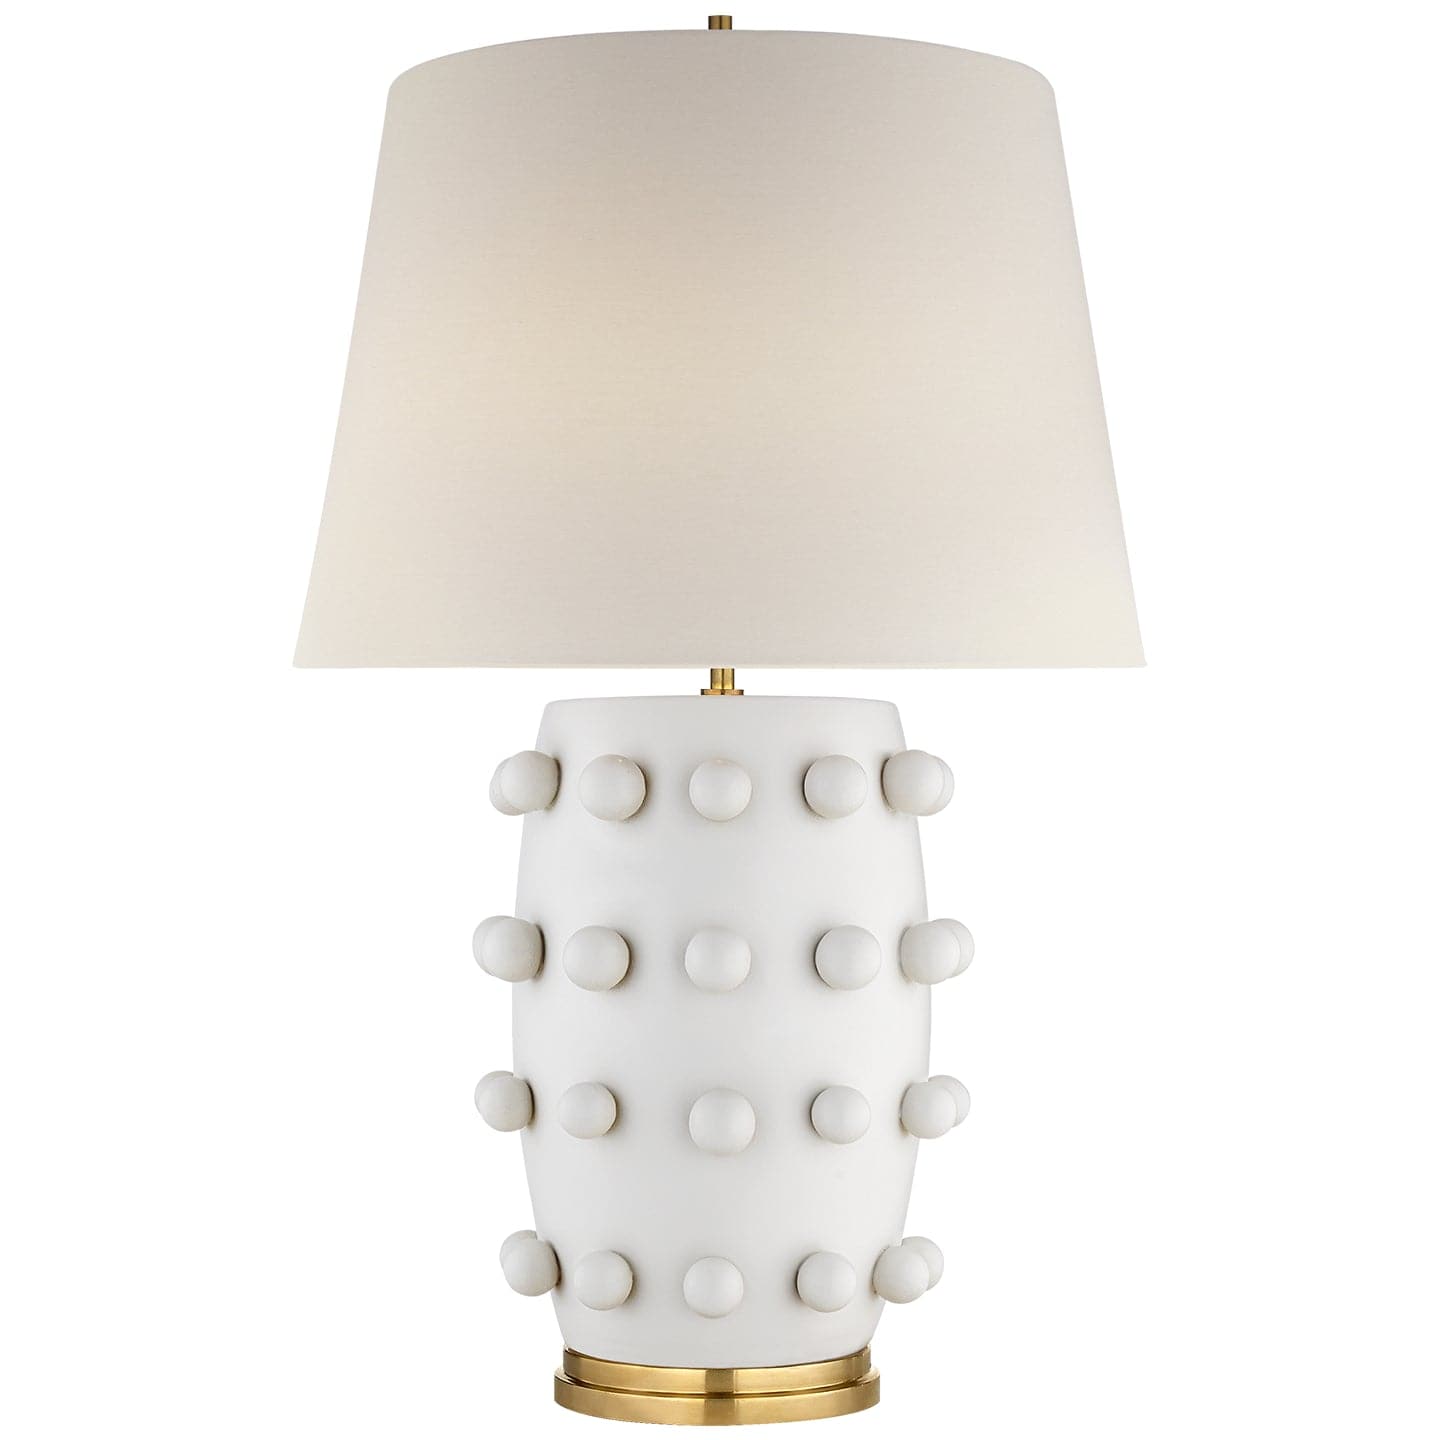 Visual Comfort Signature - KW 3031PW-L - One Light Table Lamp - Linden - Plaster White